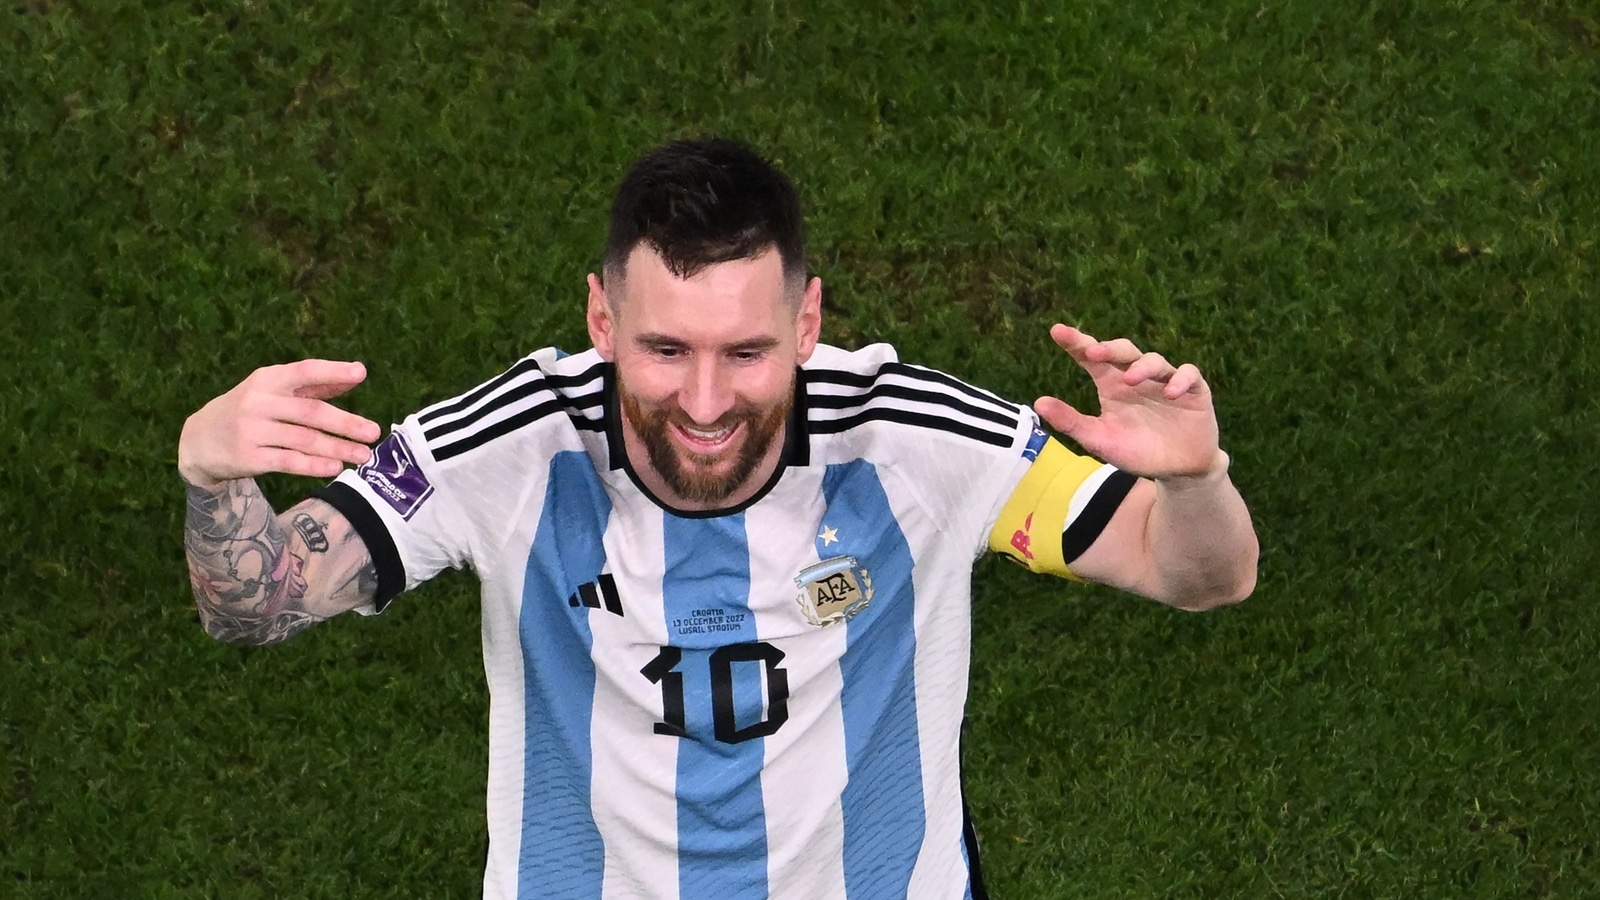 Lionel Messi confirms 2022 World Cup will be his last